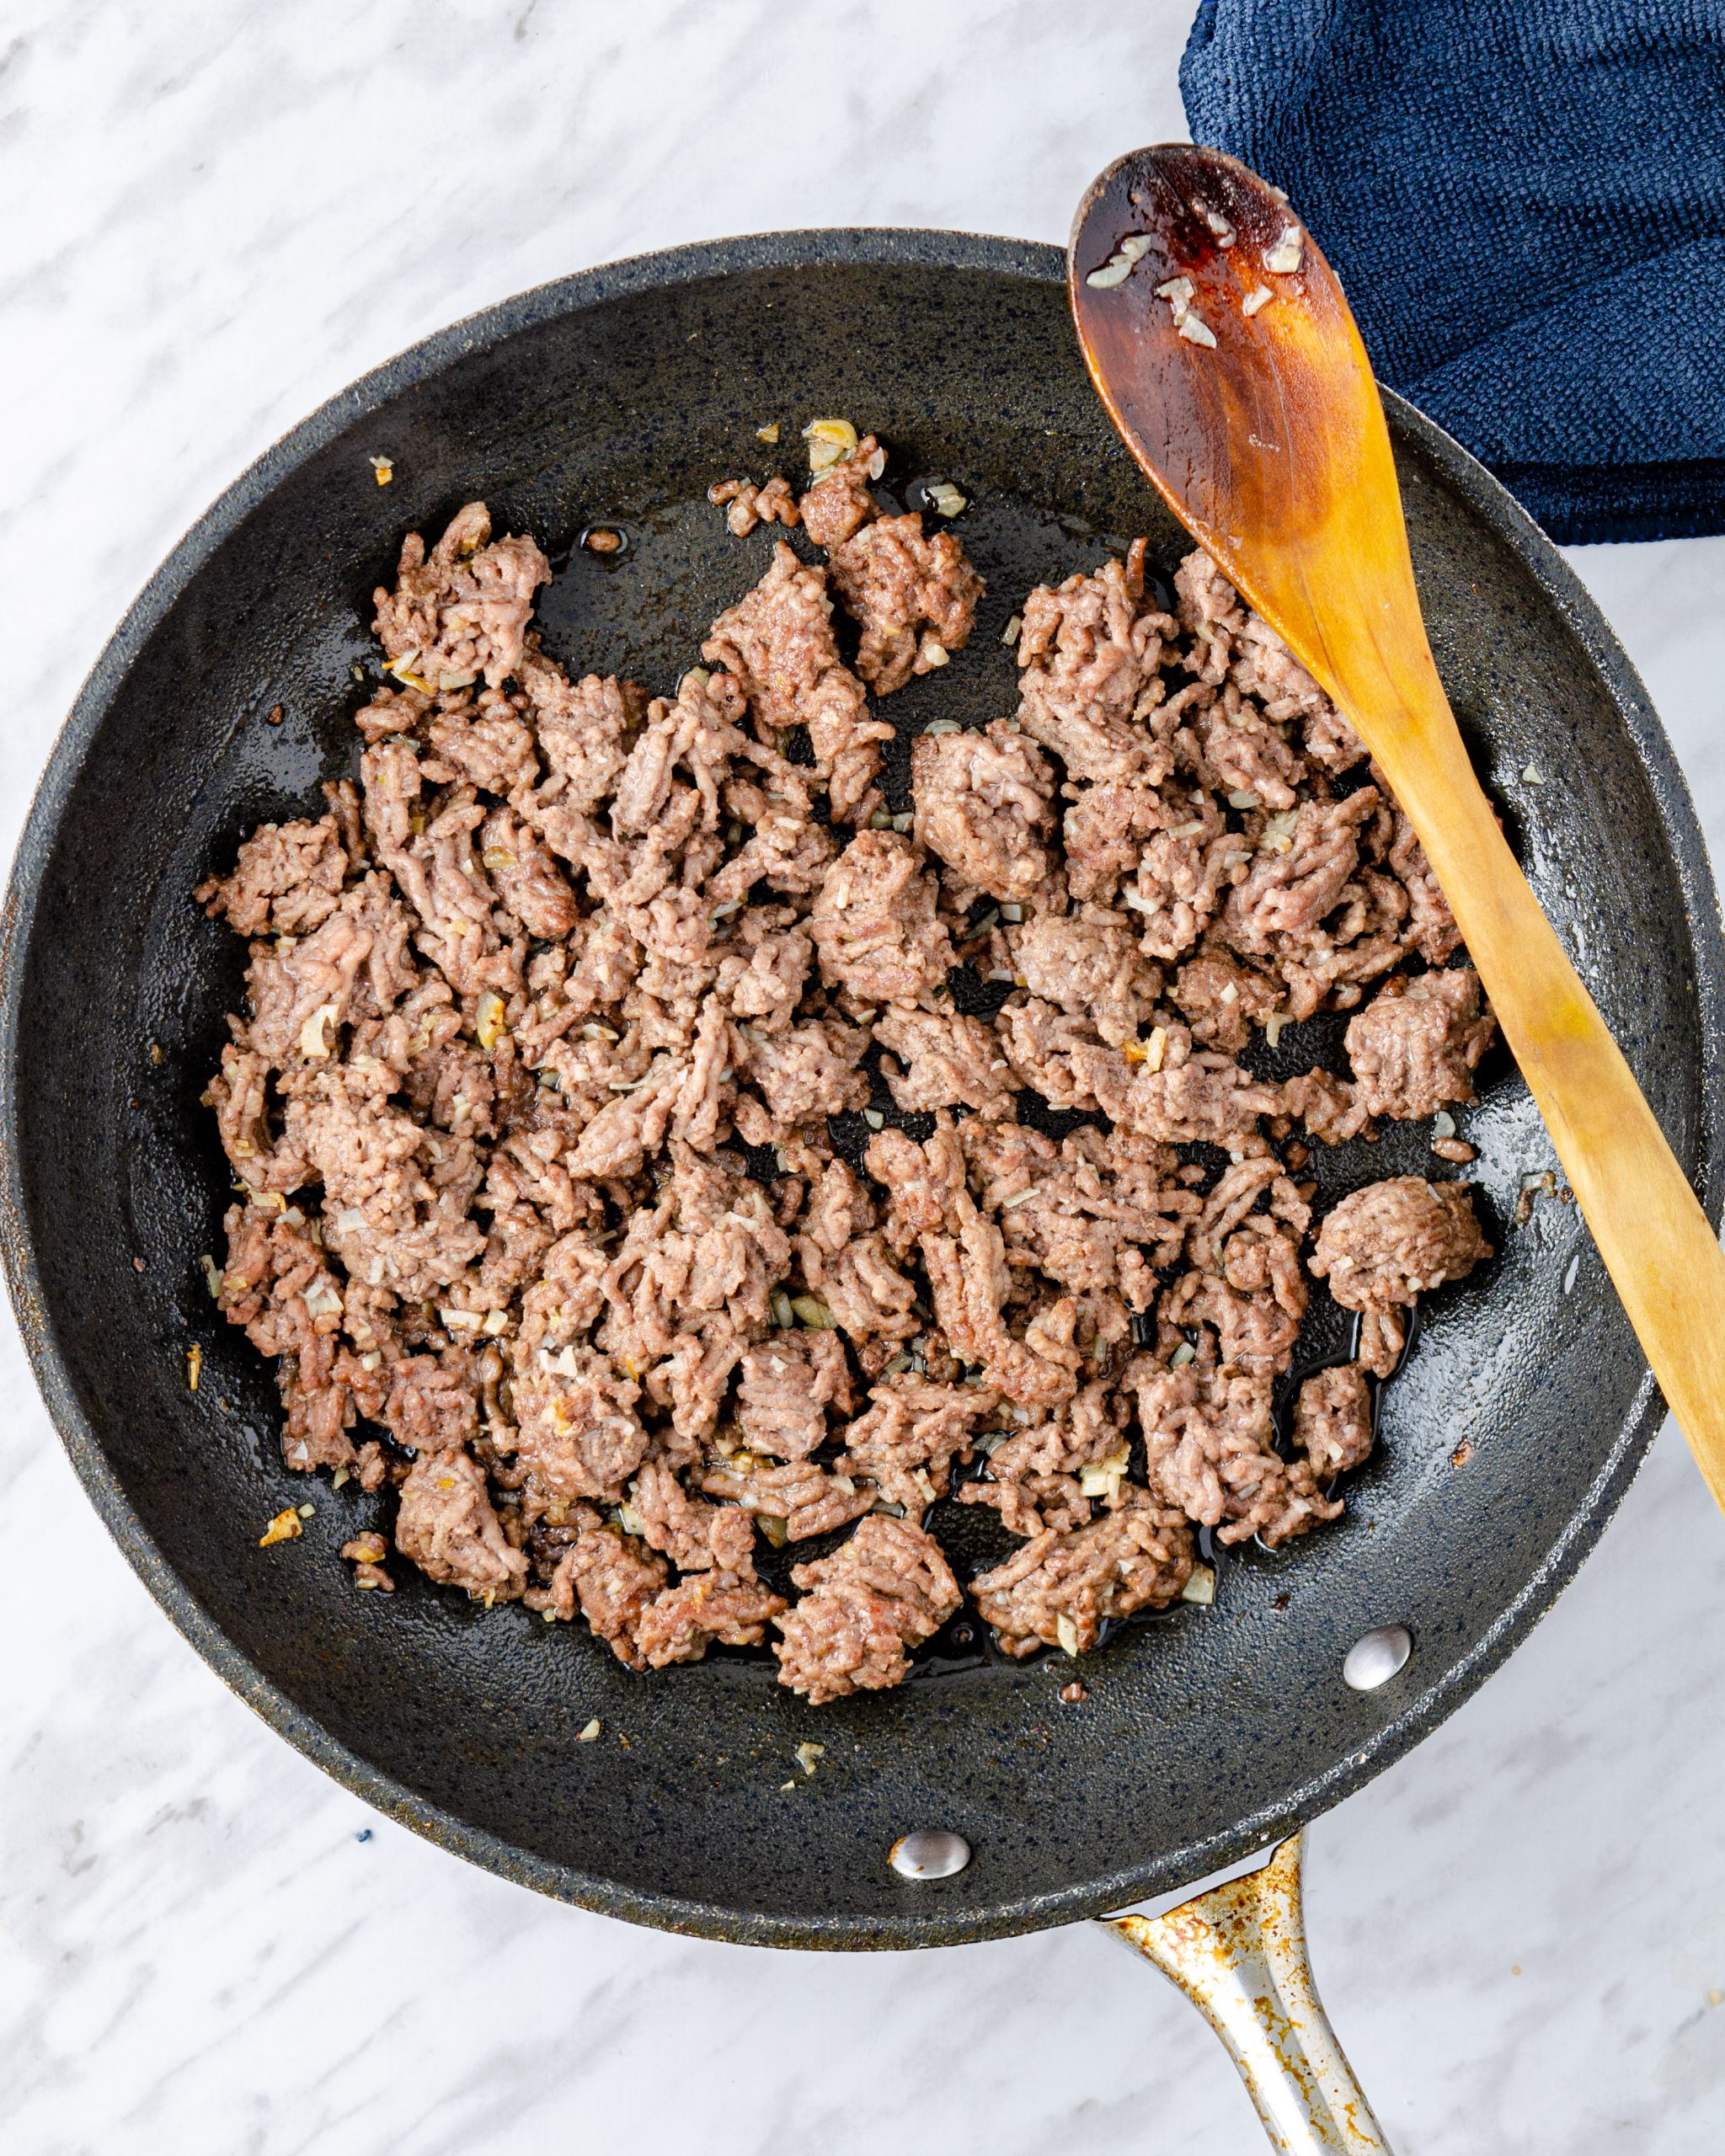 Stir-fry until beef is evenly browned for 5-7 minutes, drain excess fat.